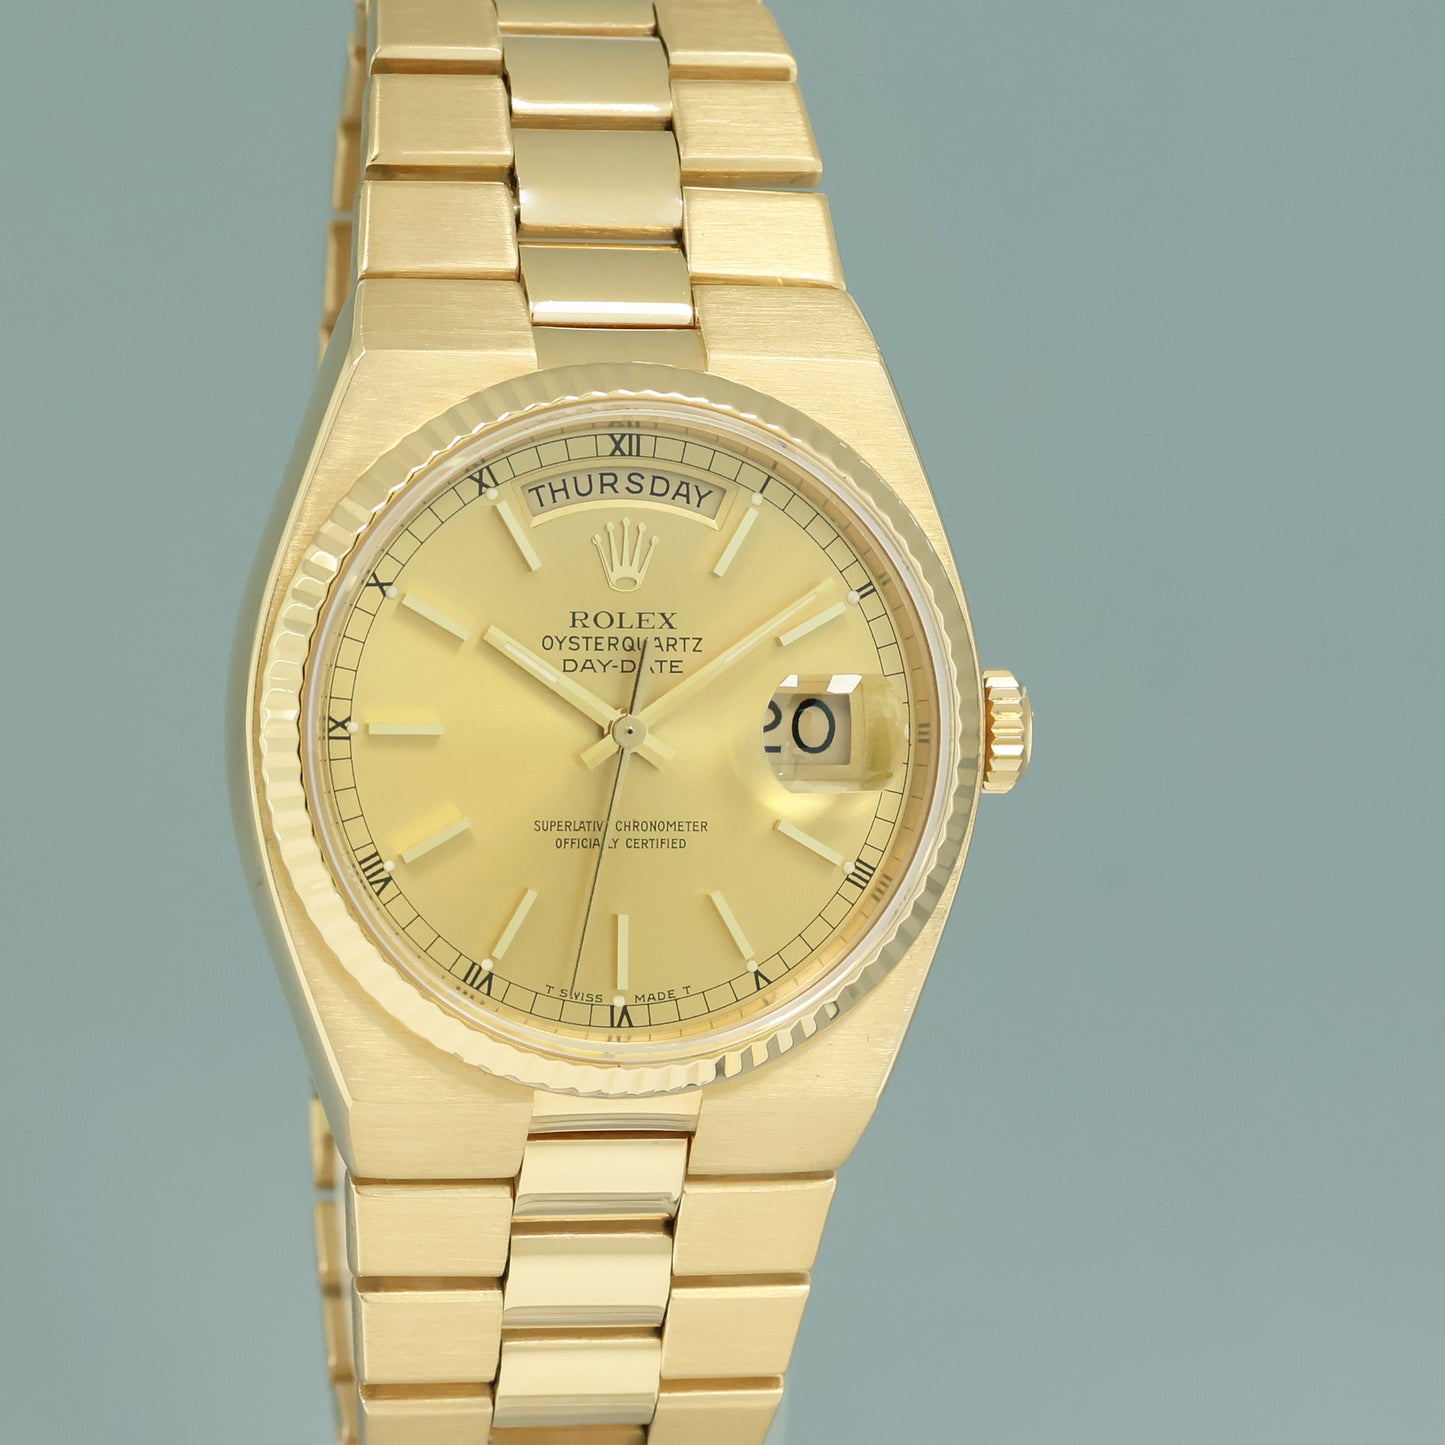 Rolex OysterQuartz 19018 Day Date President Champagne Yellow Gold 36mm Watch Box